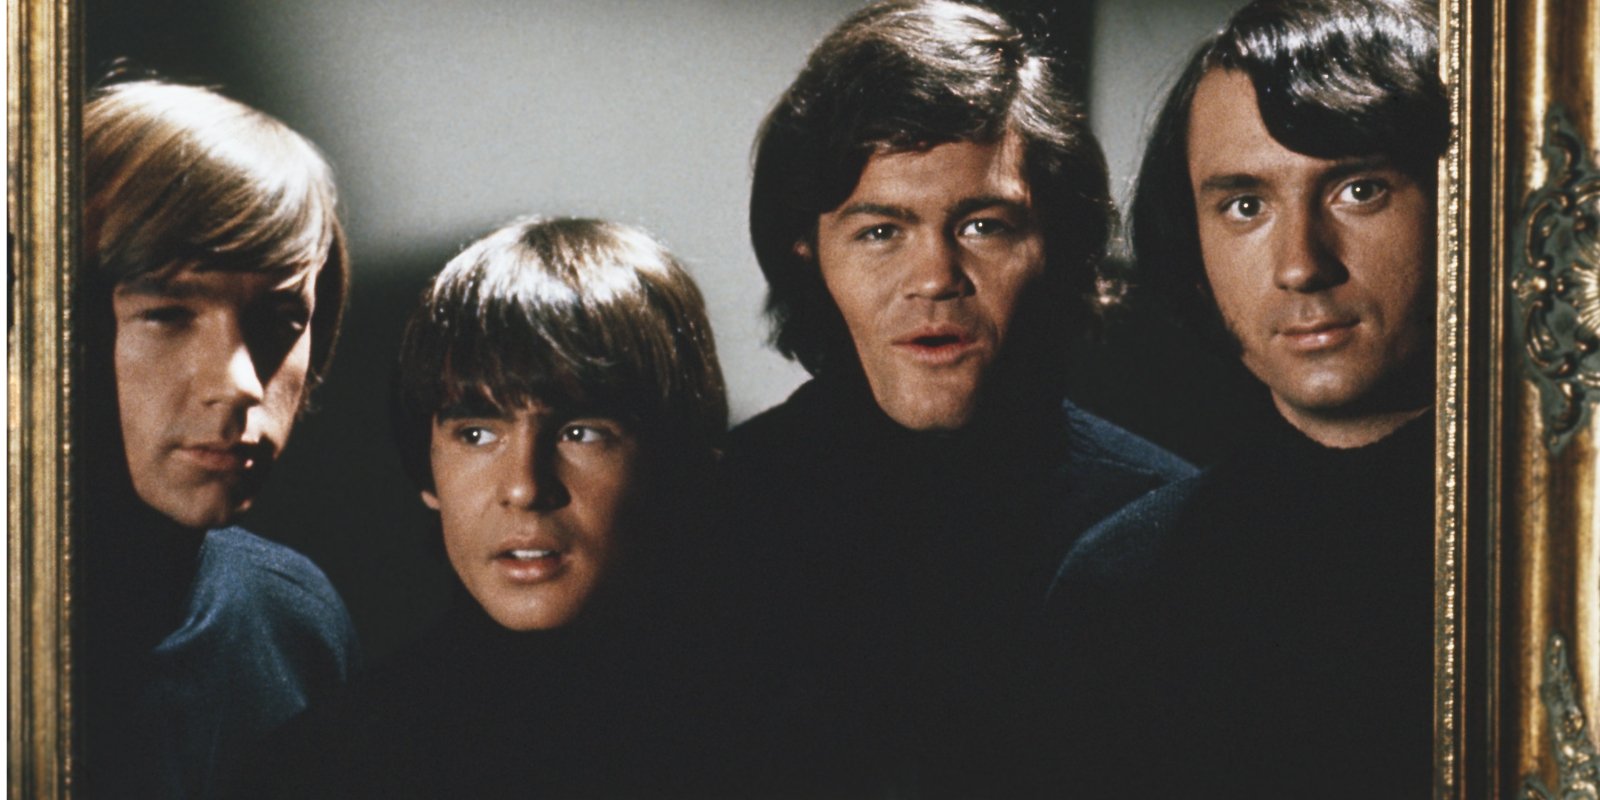 The cast of 'The Monkees' included Peter Tork, Davy Jones, Micky Dolenz, and Mike Nesmith.